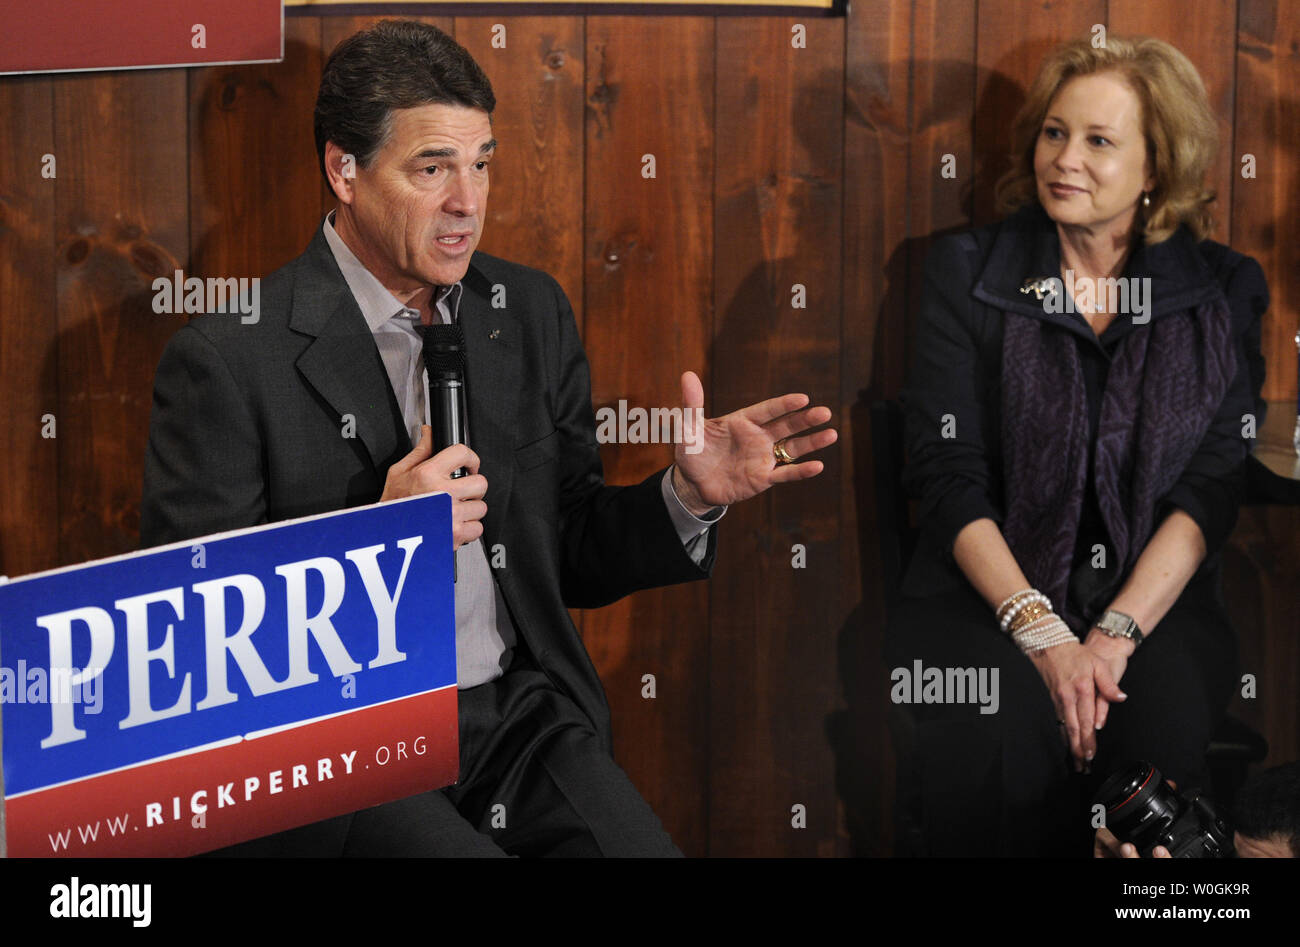 Republican 2012 presidential candidate and Texas Gov. Rick Perry responds to a question as his wife Anita (R) listens along with supporters during a campaign stop at The Fainting Goat Bar and Grill in Waverly, Iowa, December 30, 2011, in advance of Iowa's first-in-the-nation caucuses, January 3, 2012.    UPI/Mike Theiler Stock Photo